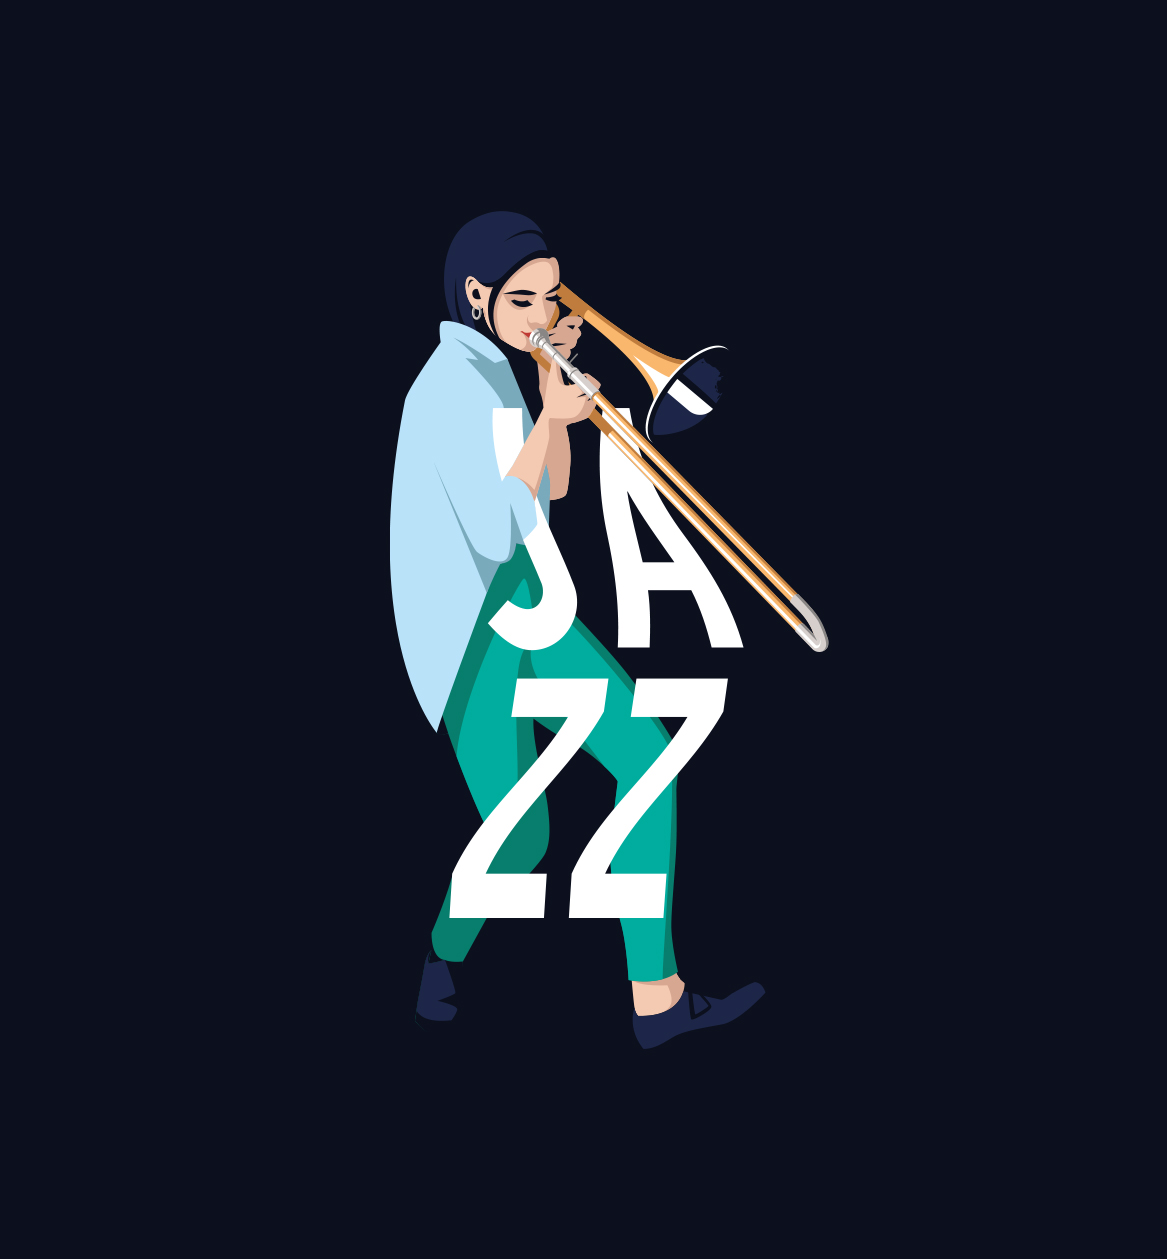 Image for the 45th edition of the Vitoria-Gasteiz Jazz Festival 2022